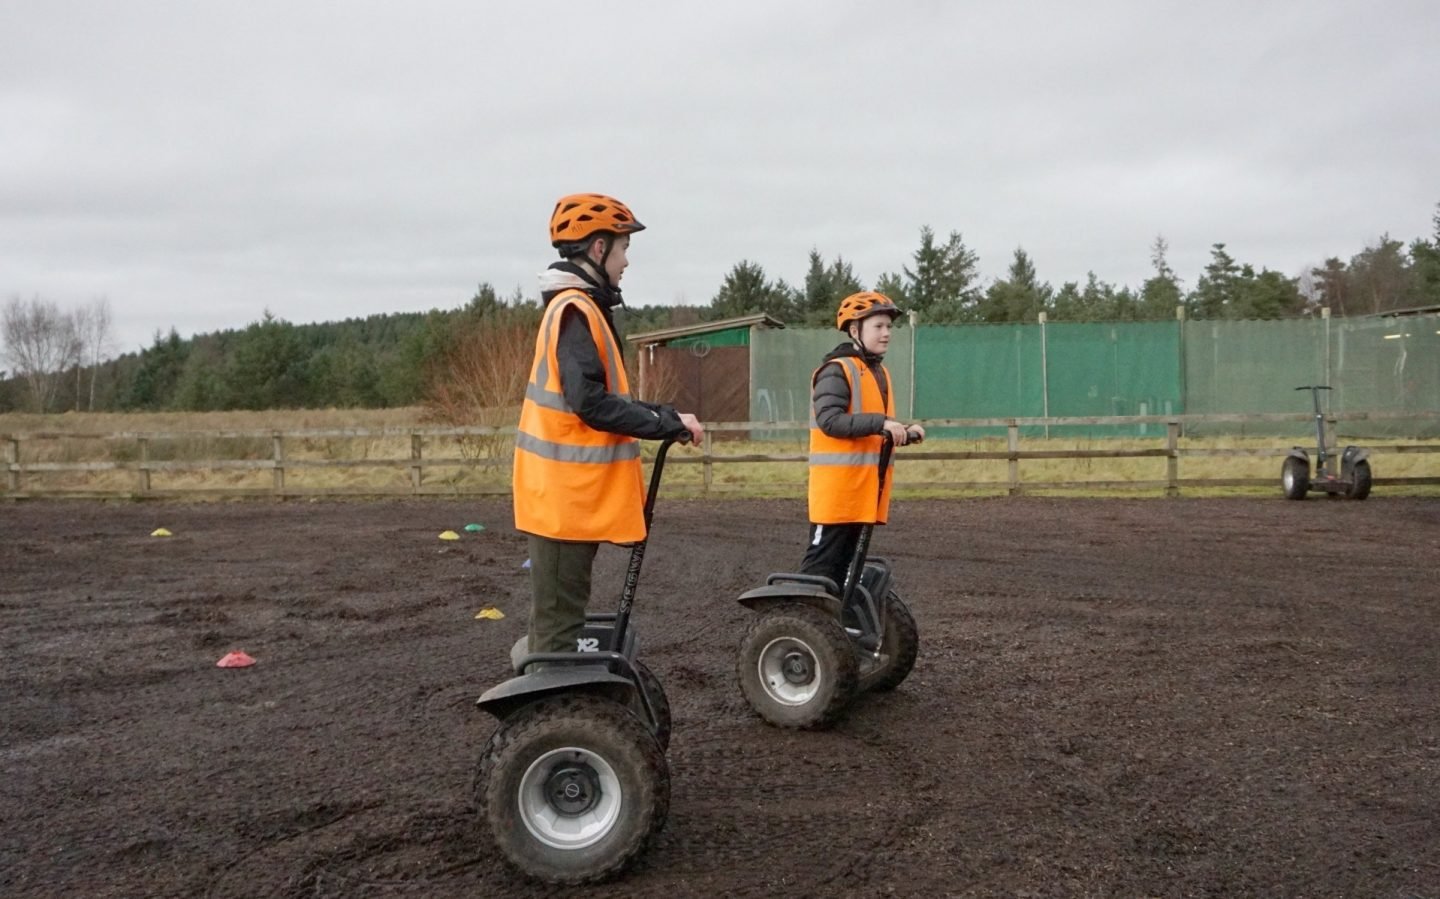 Teenagers and Segway at Centerparcs Whinfell Forrest ww.extraordinarychaos.com